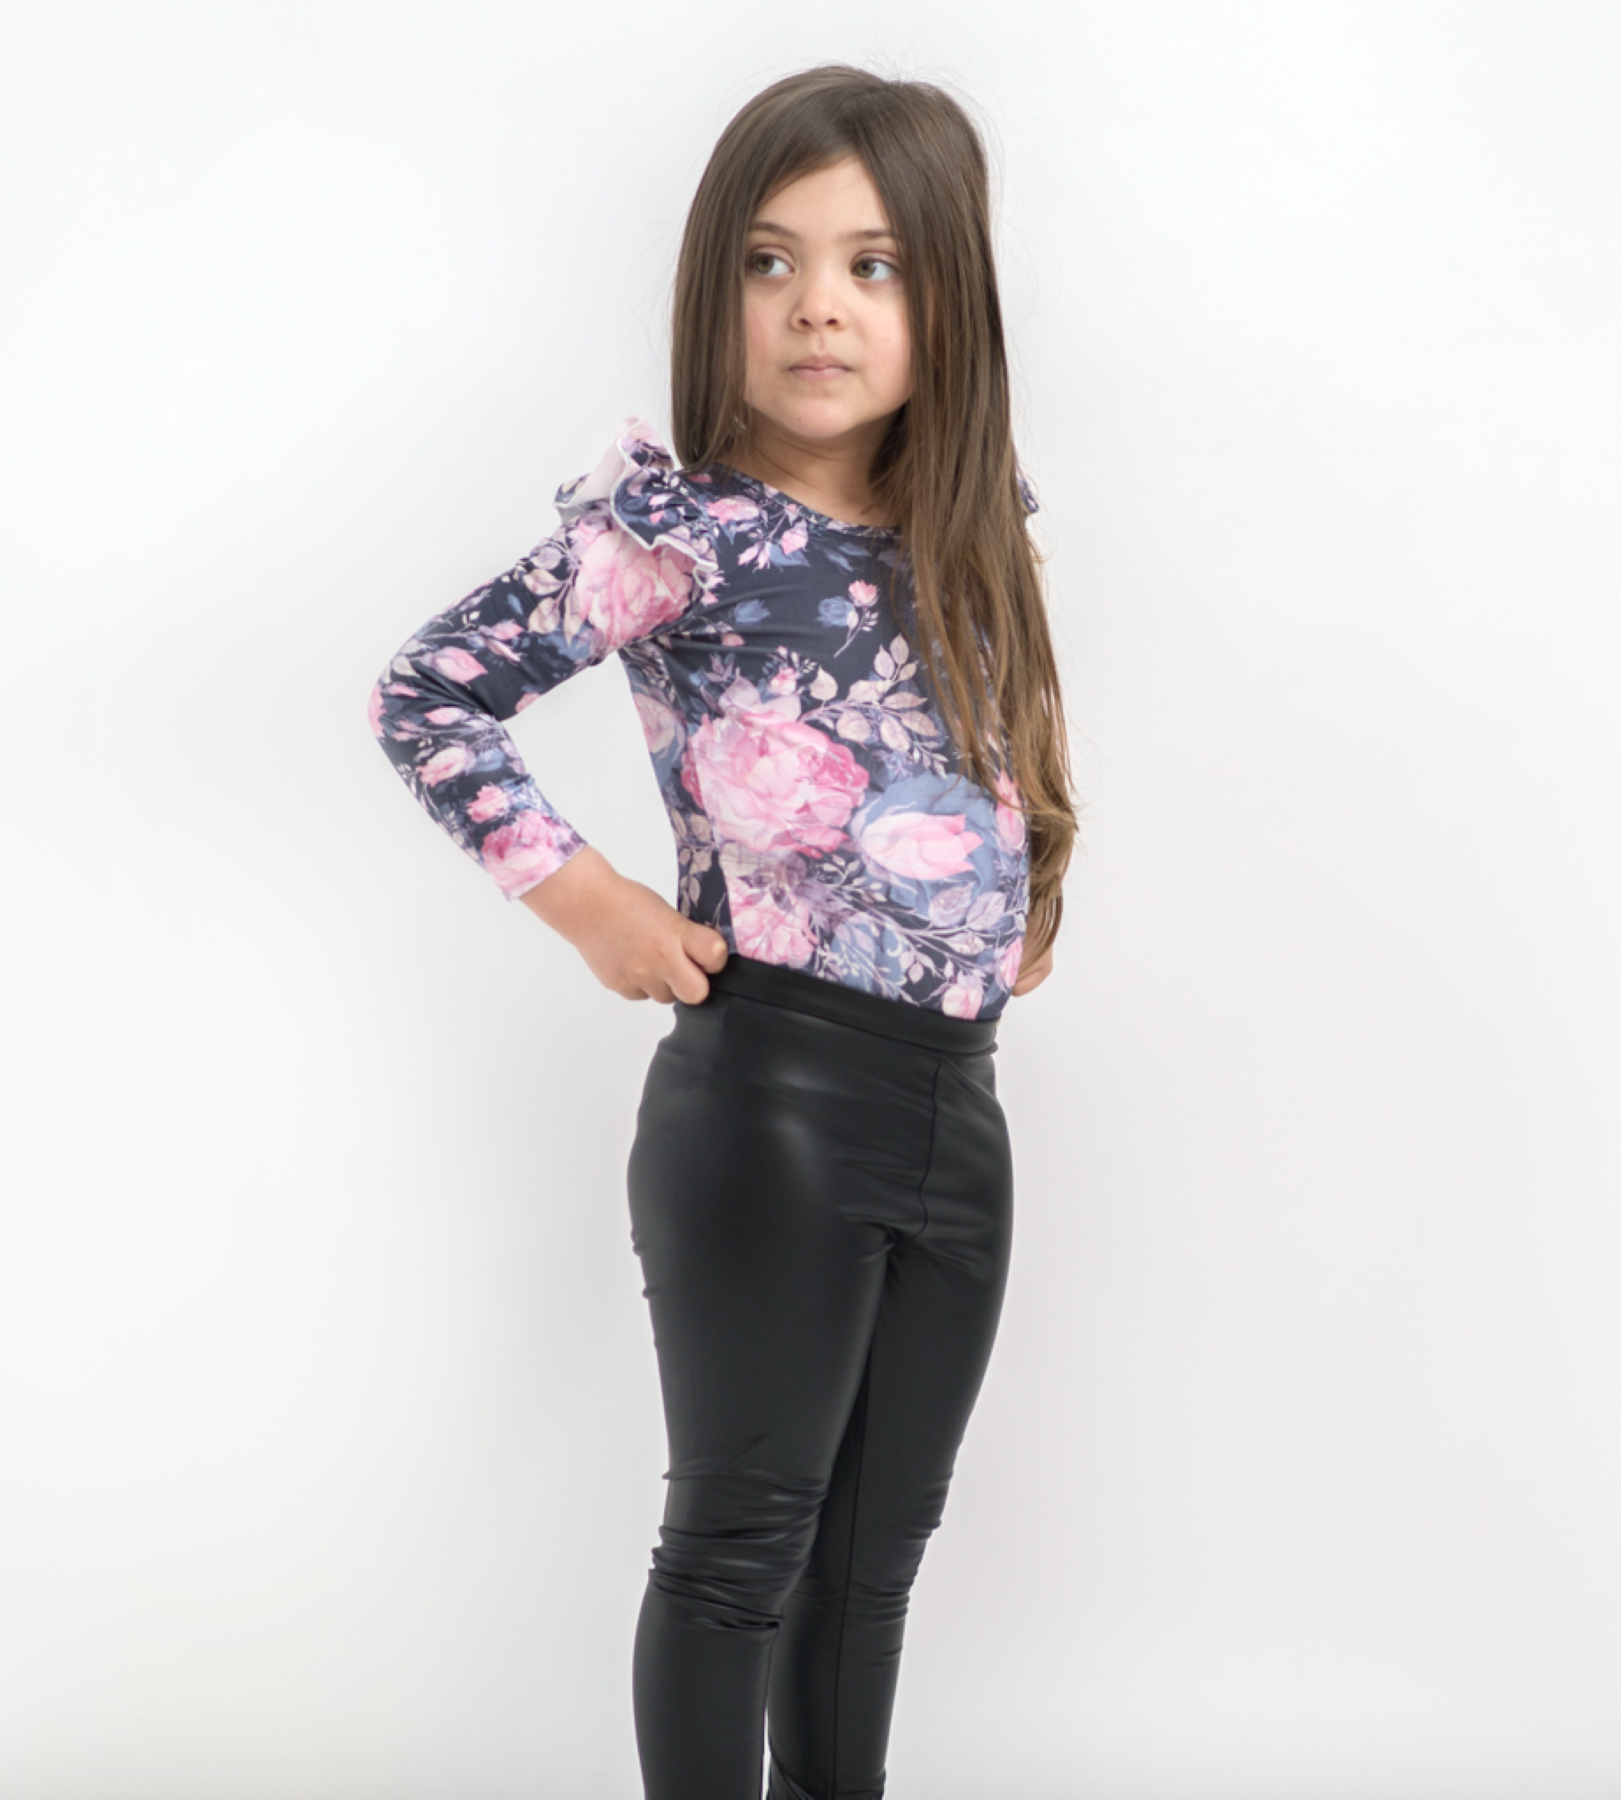 Little Hearts Leggings - Faux Leather - CLOTHING-GIRL-Girls Pants